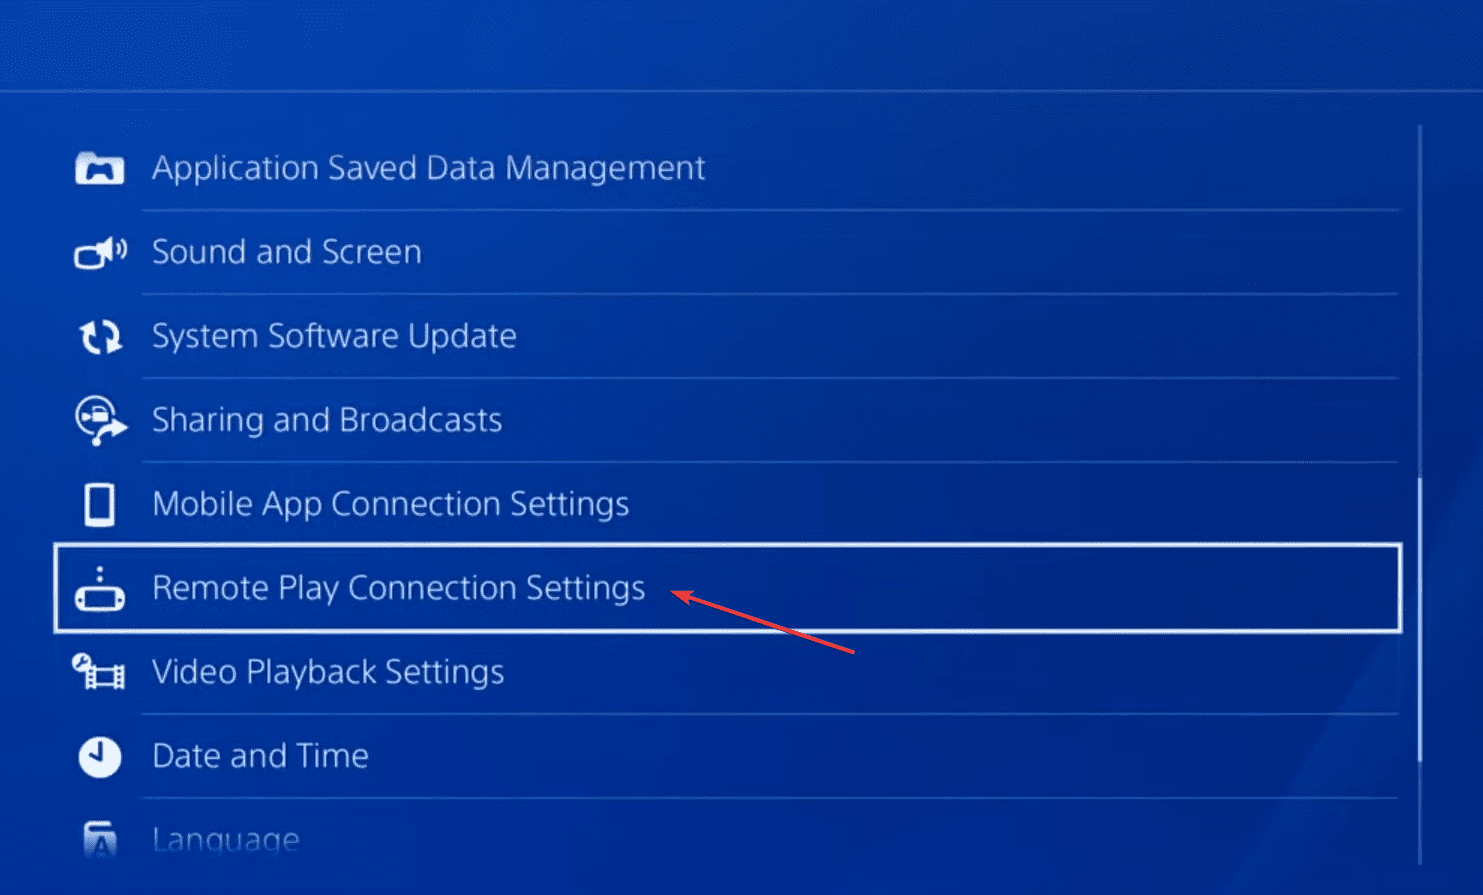 remote play connection settings